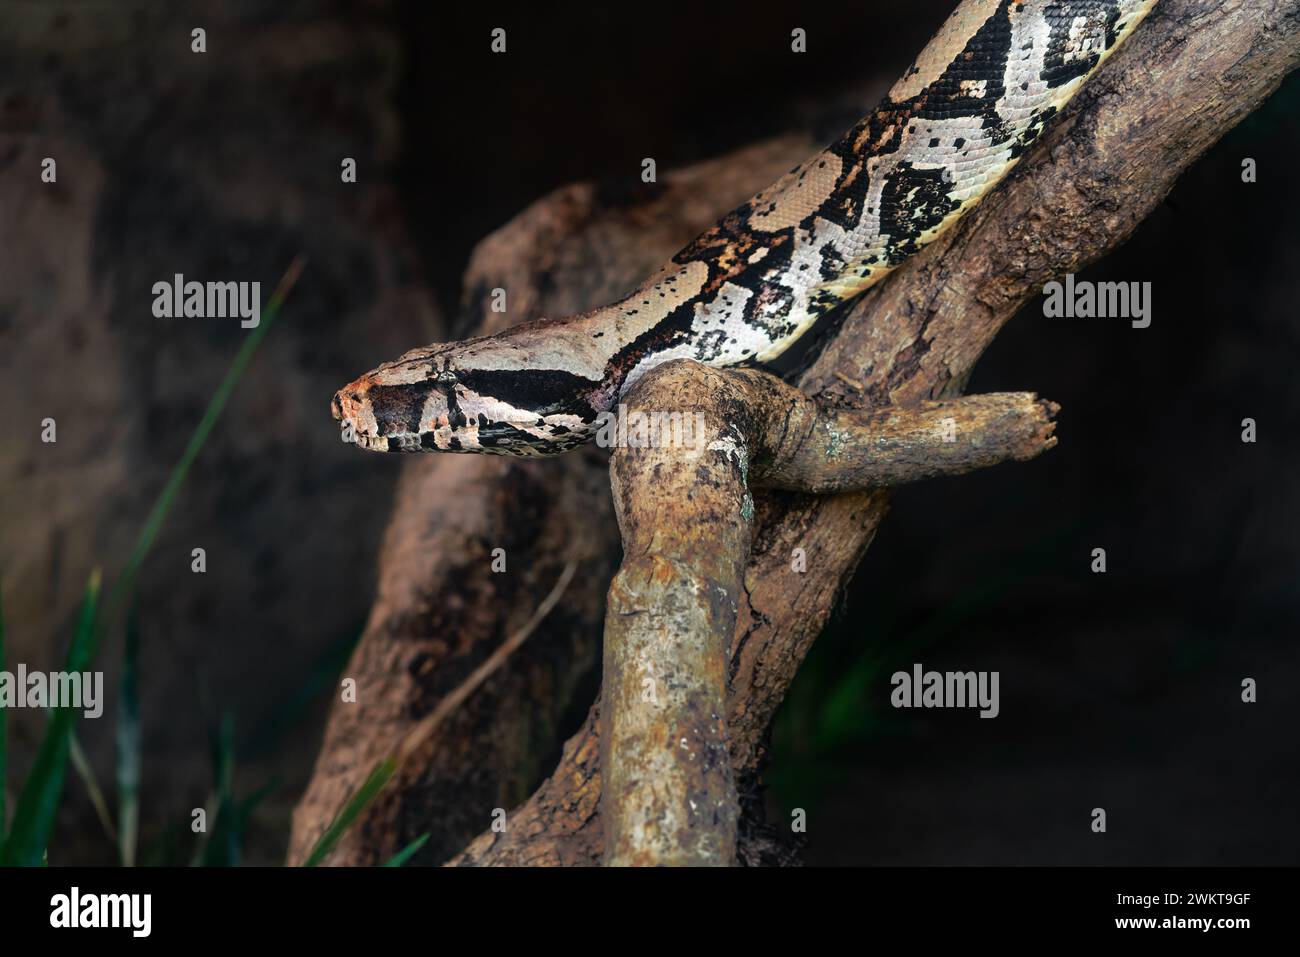 Red Tail Boa Snake (Boa constrictor constrictor) Banque D'Images